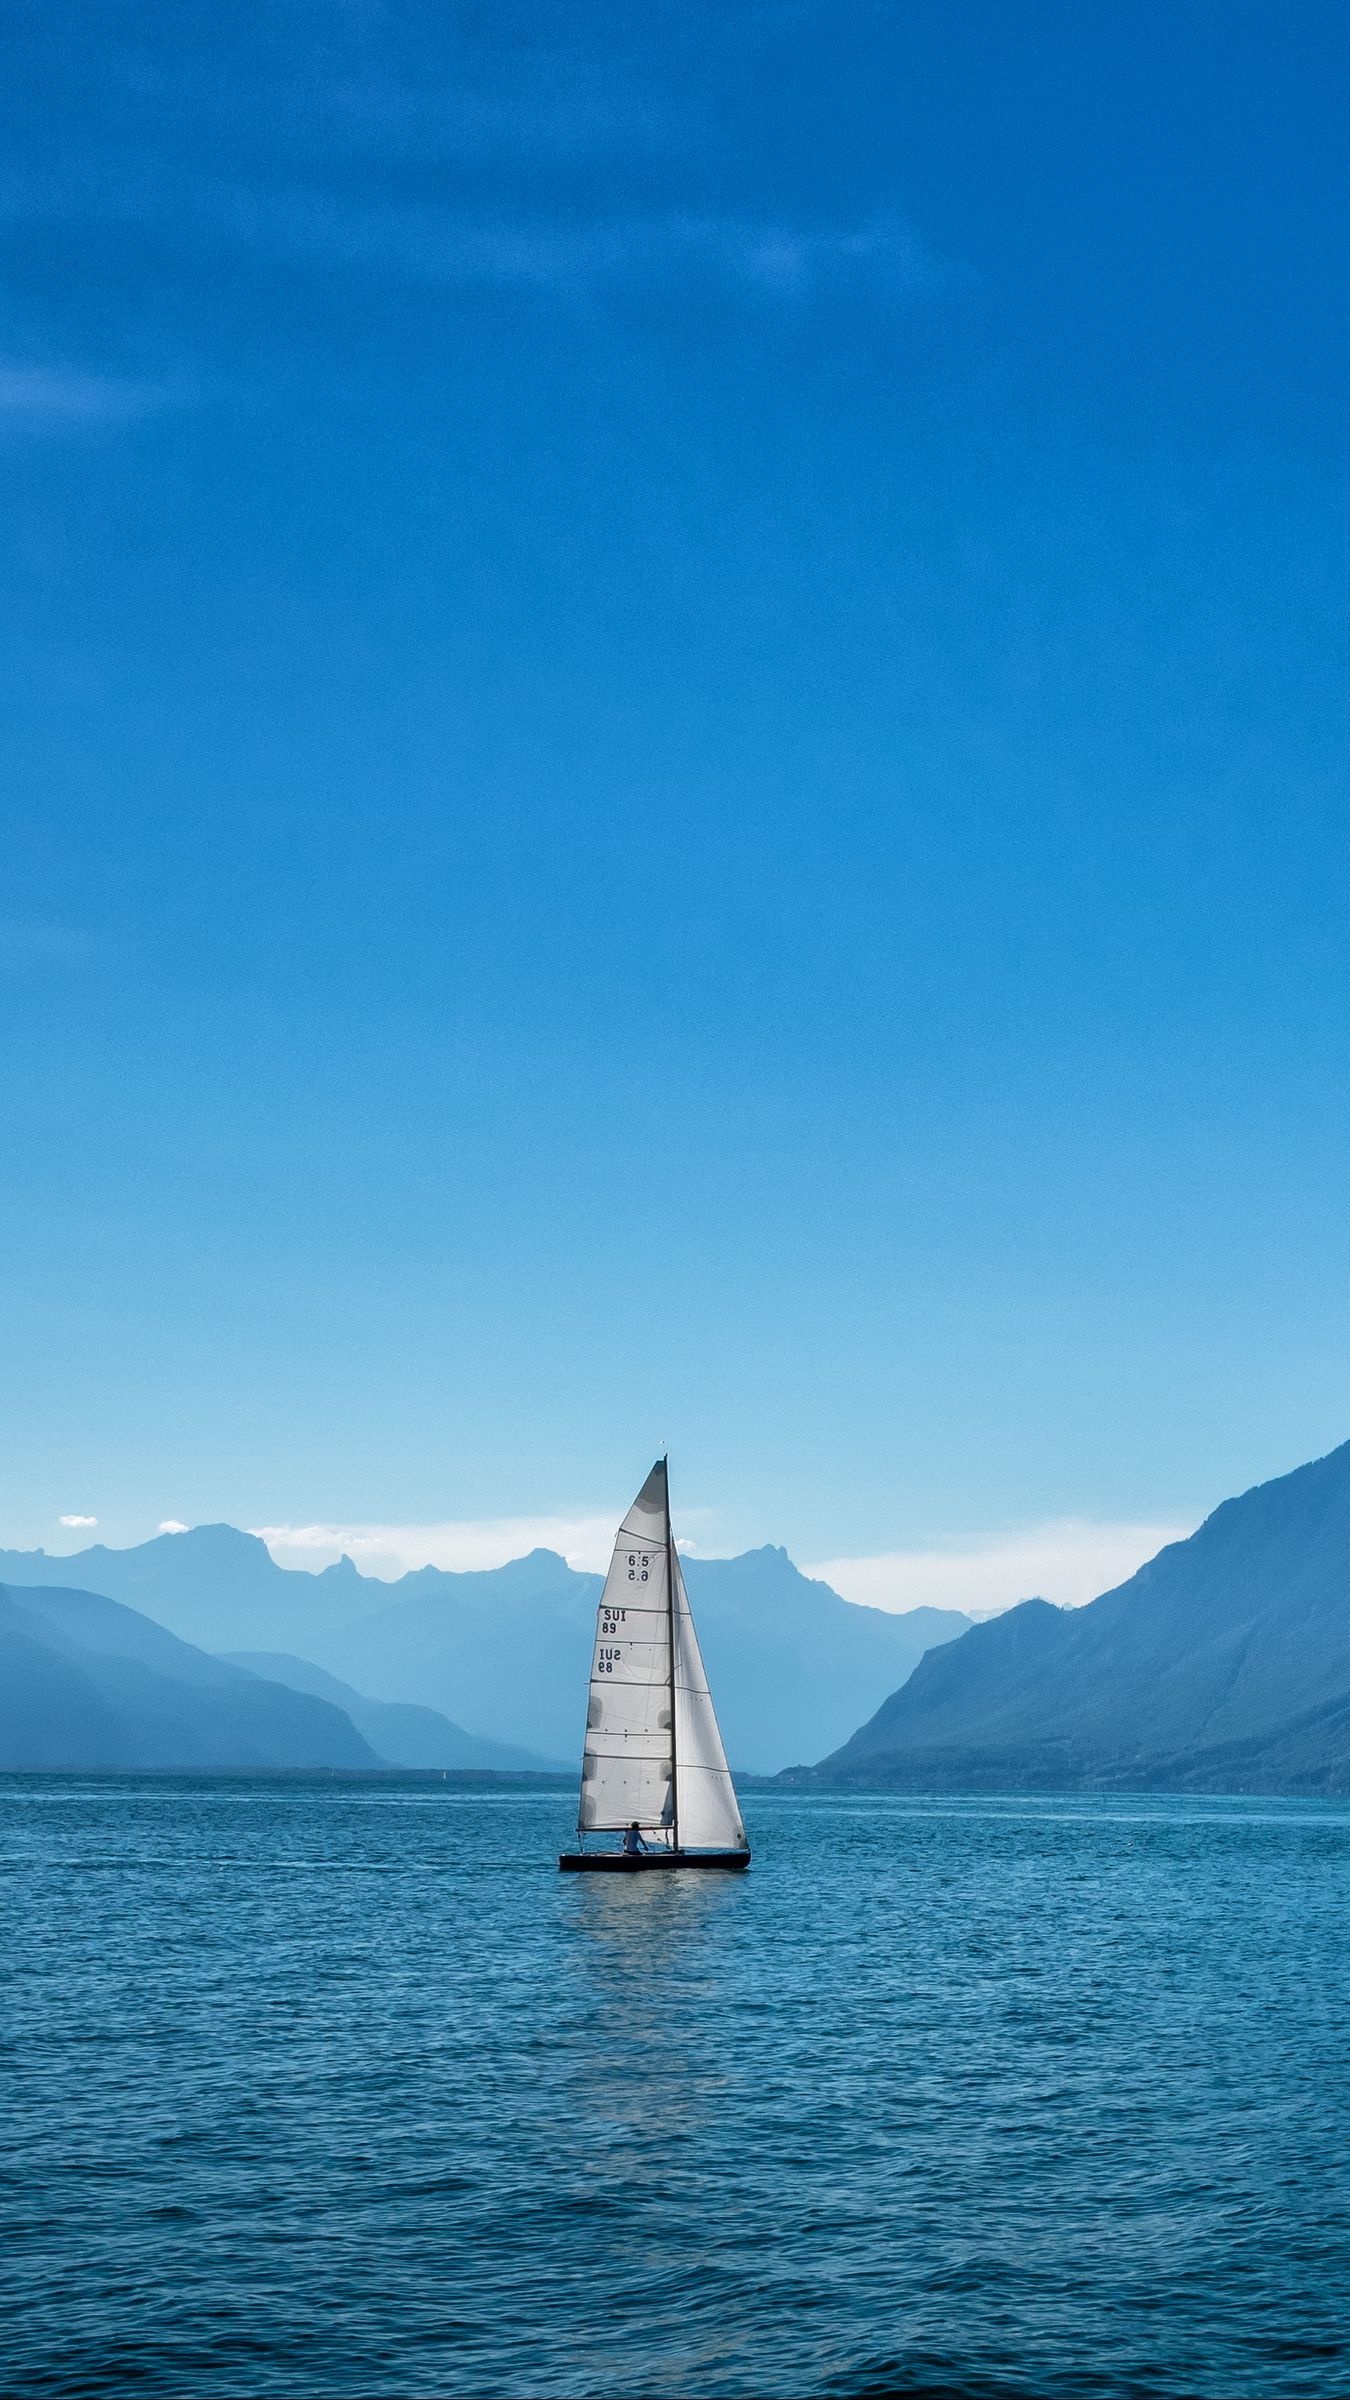 Sail Boat: A dinghy, A type of small open vessel commonly used for recreation, sail training. 1350x2400 HD Wallpaper.